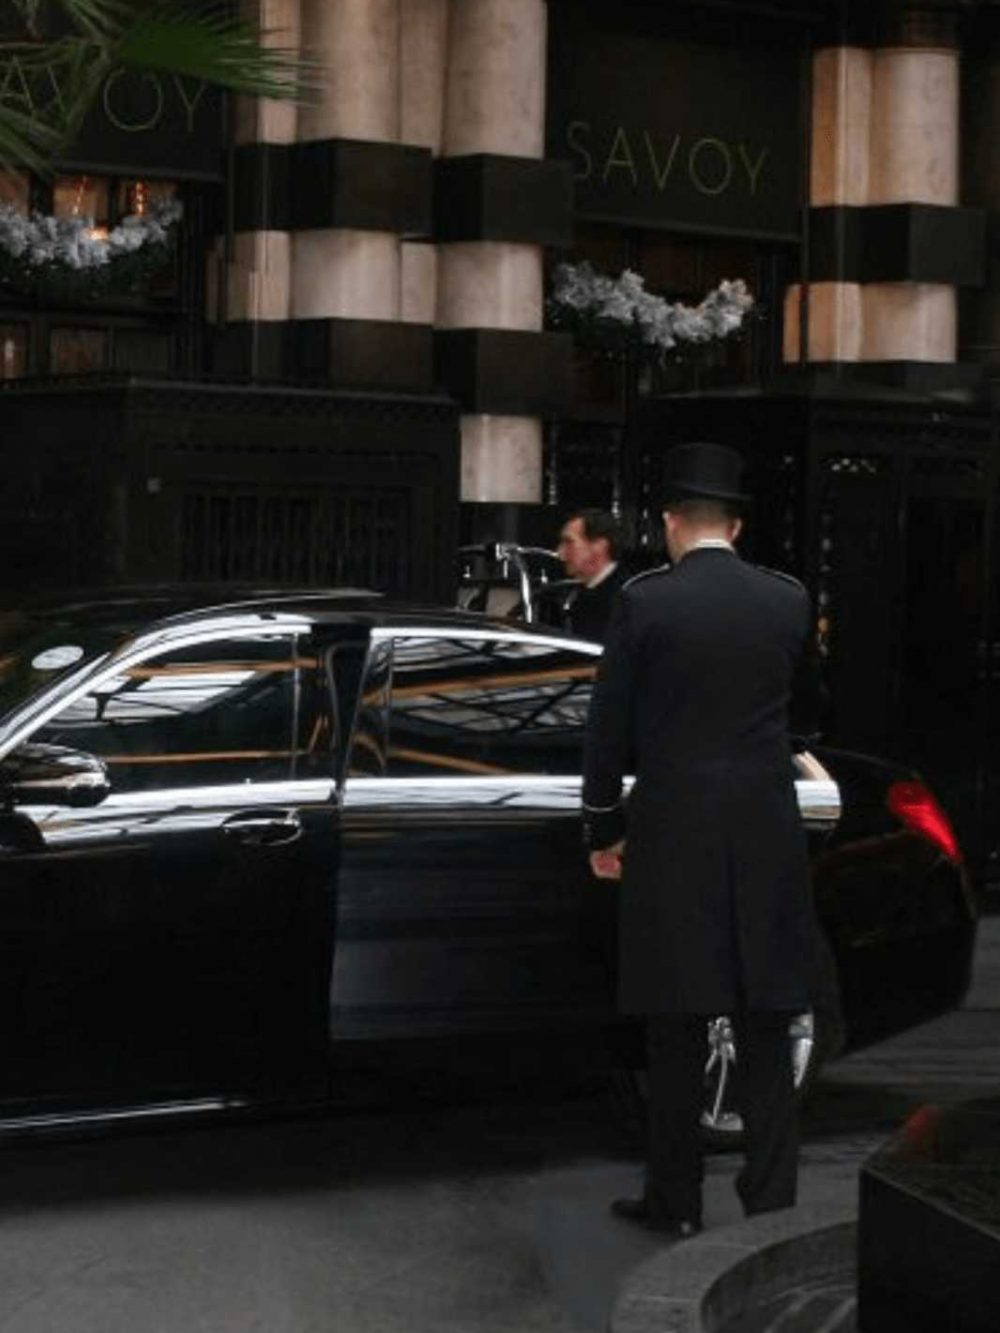 Bedford Limo service - chauffeur - luxury limousine - airport transfers - car service Bedford MA